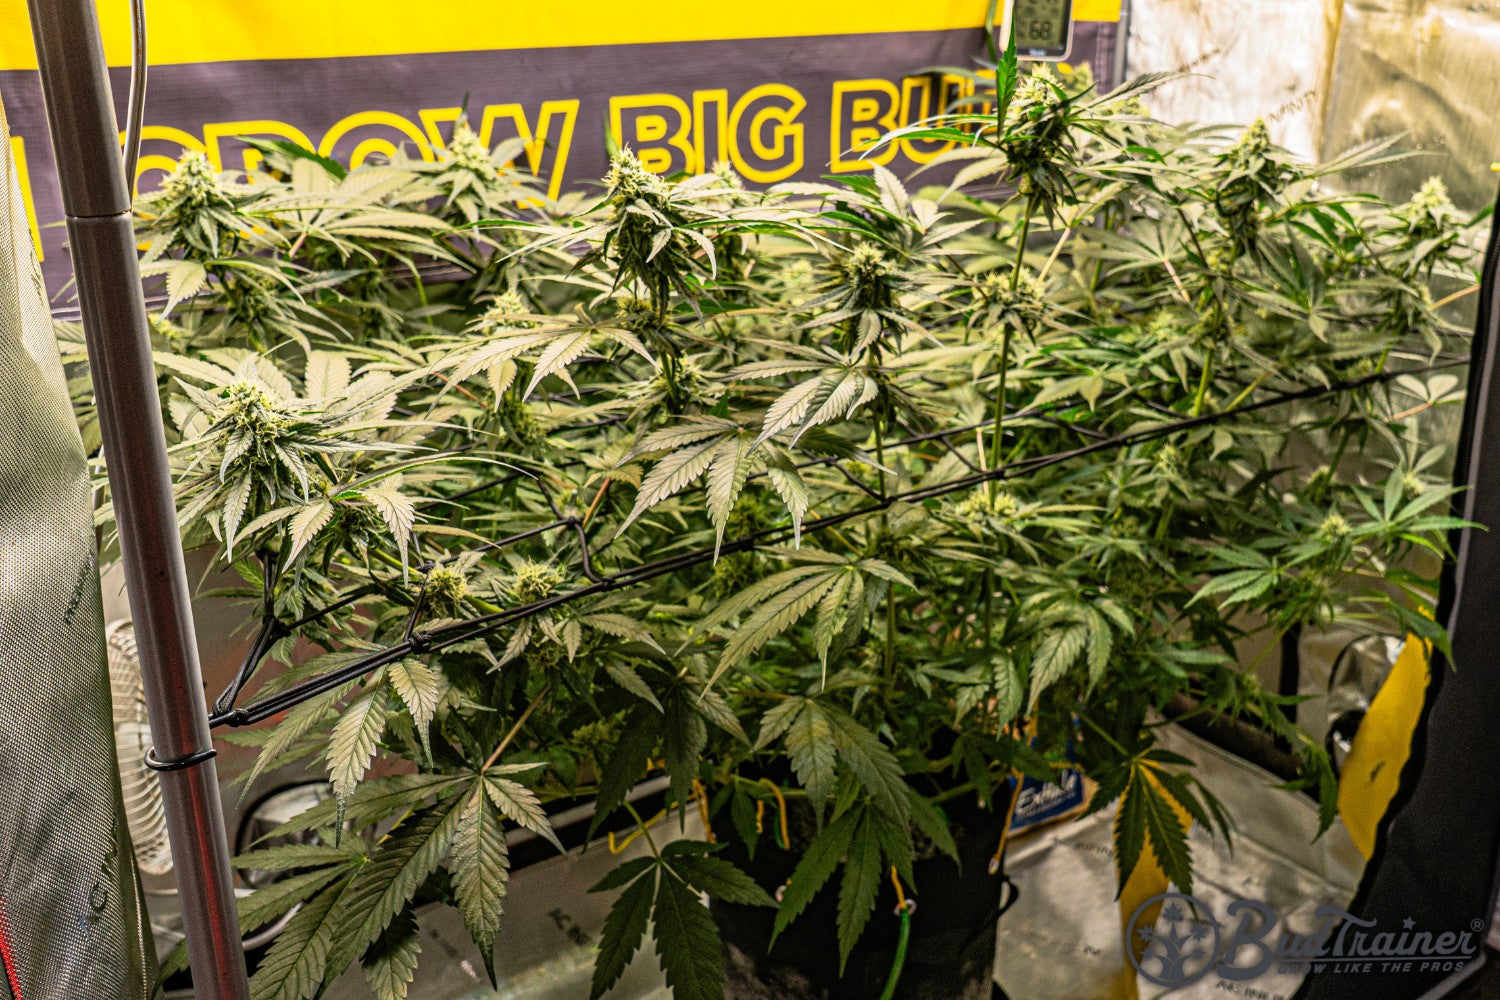 Indoor cannabis plants are supported by a trellis net and grow under artificial lighting. The plants are healthy and covered with green leaves, with a yellow sign in the background that reads ‘GROW BIG BUDS.'